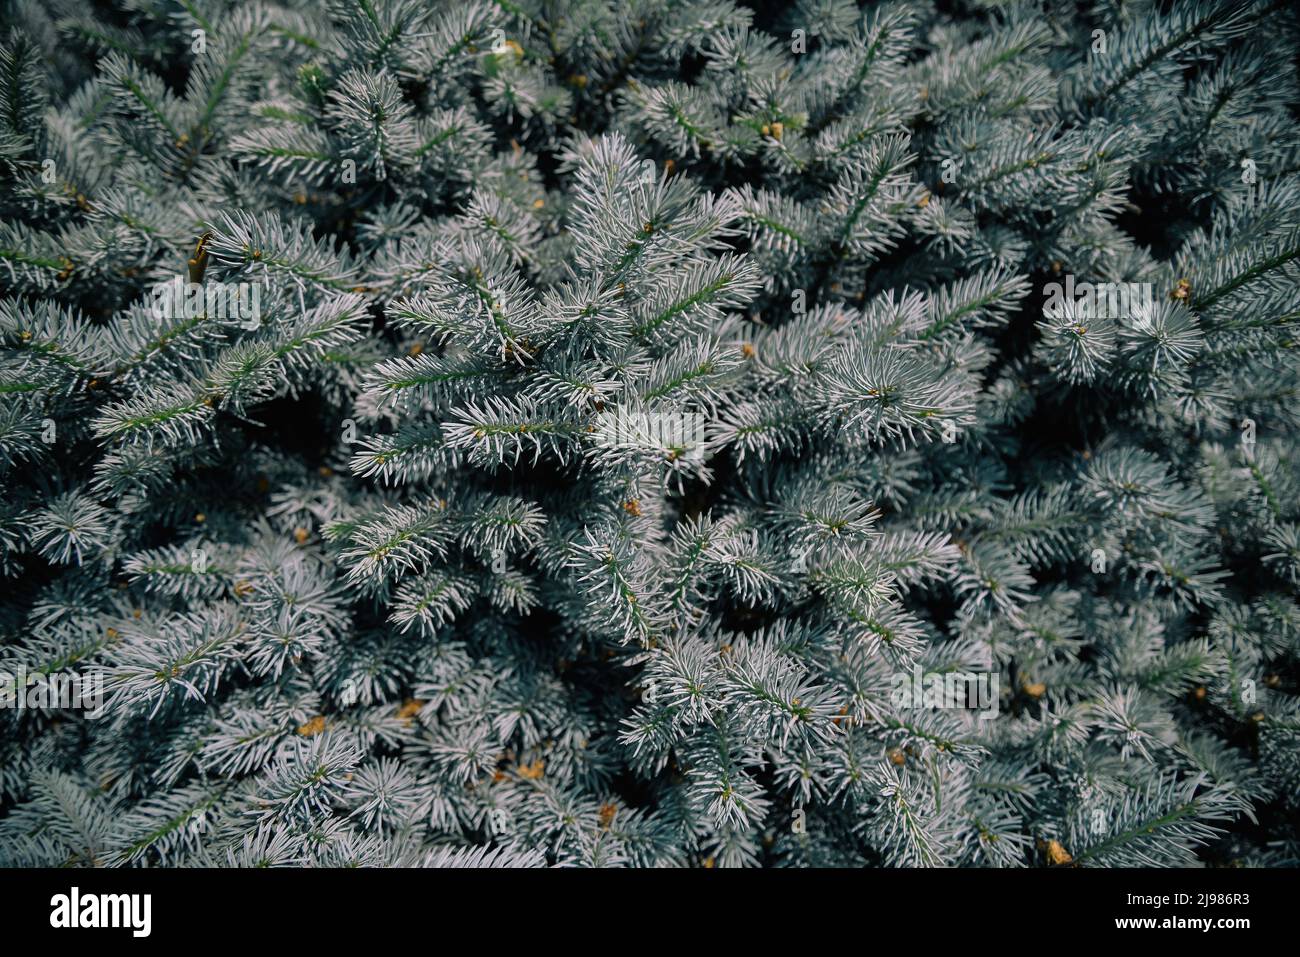 The blue spruce (Picea pungens), also commonly known as green spruce, white spruce. It is native to North America and is found naturally in Arizona, C Stock Photo